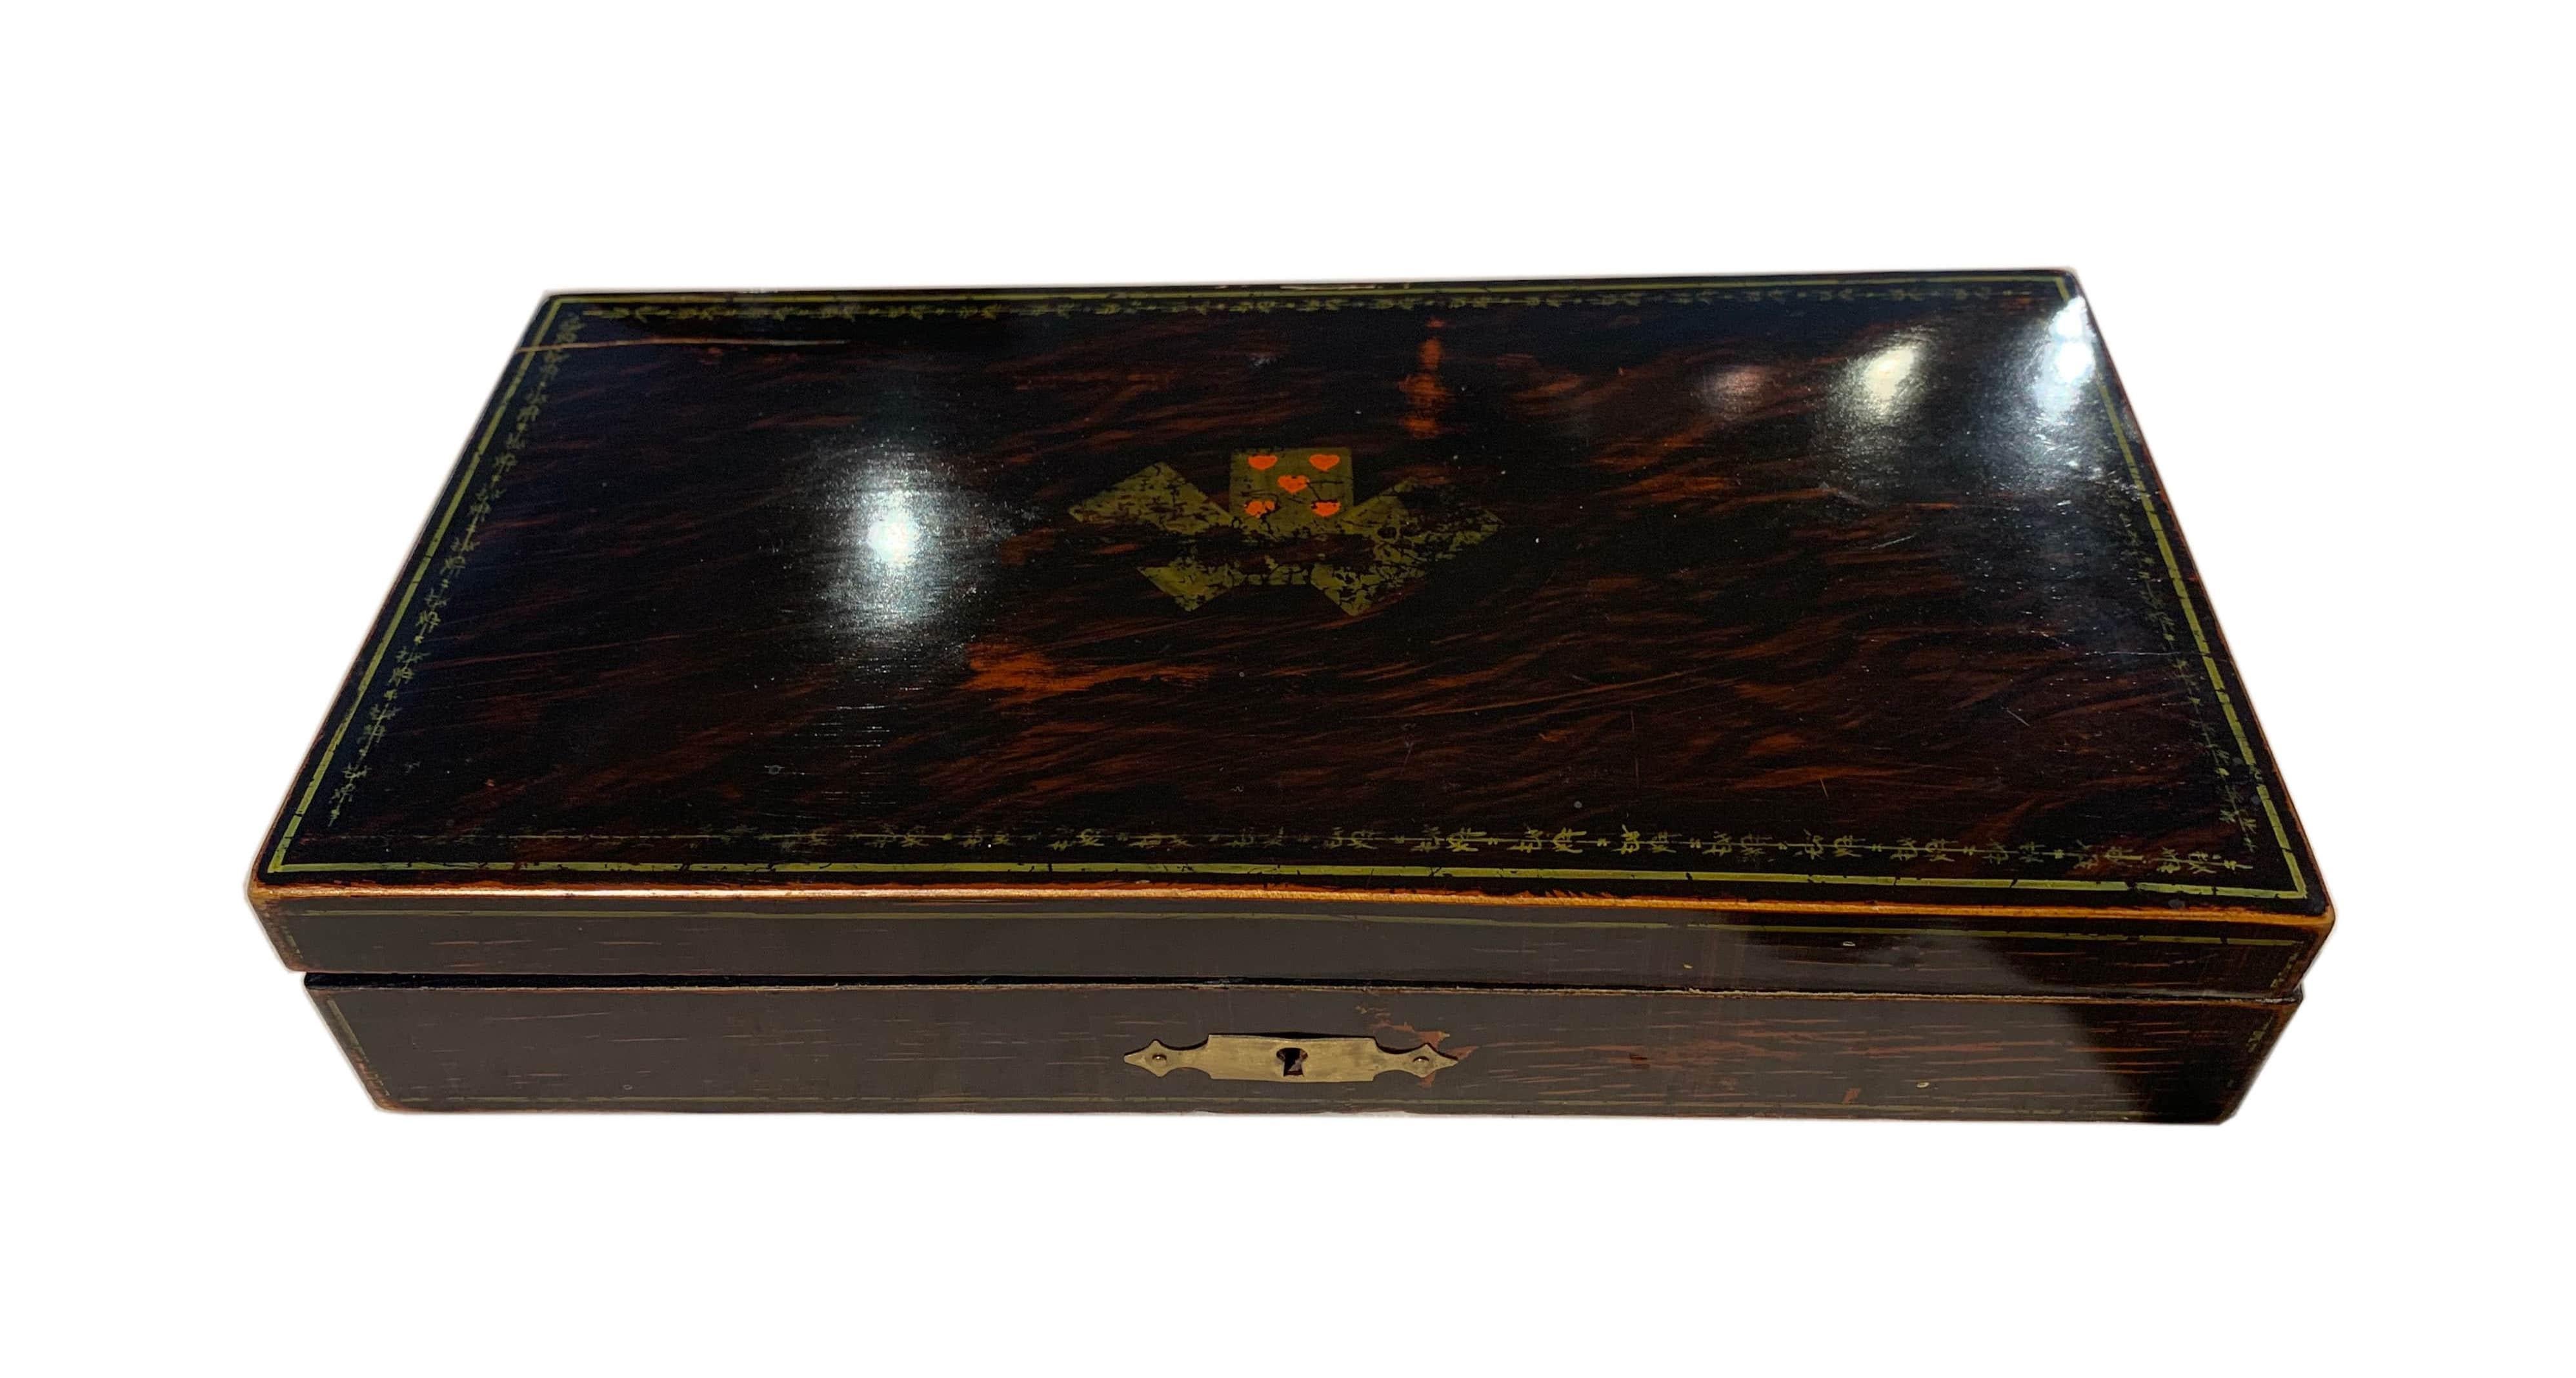 Beautiful Art Deco playing cards casket / box. 

The wood is palisander/rosewood in- and outside and it has a slightly torn down original painted motif of three playing cards on the upper side. 
Around the top cover, there is a are fully painted